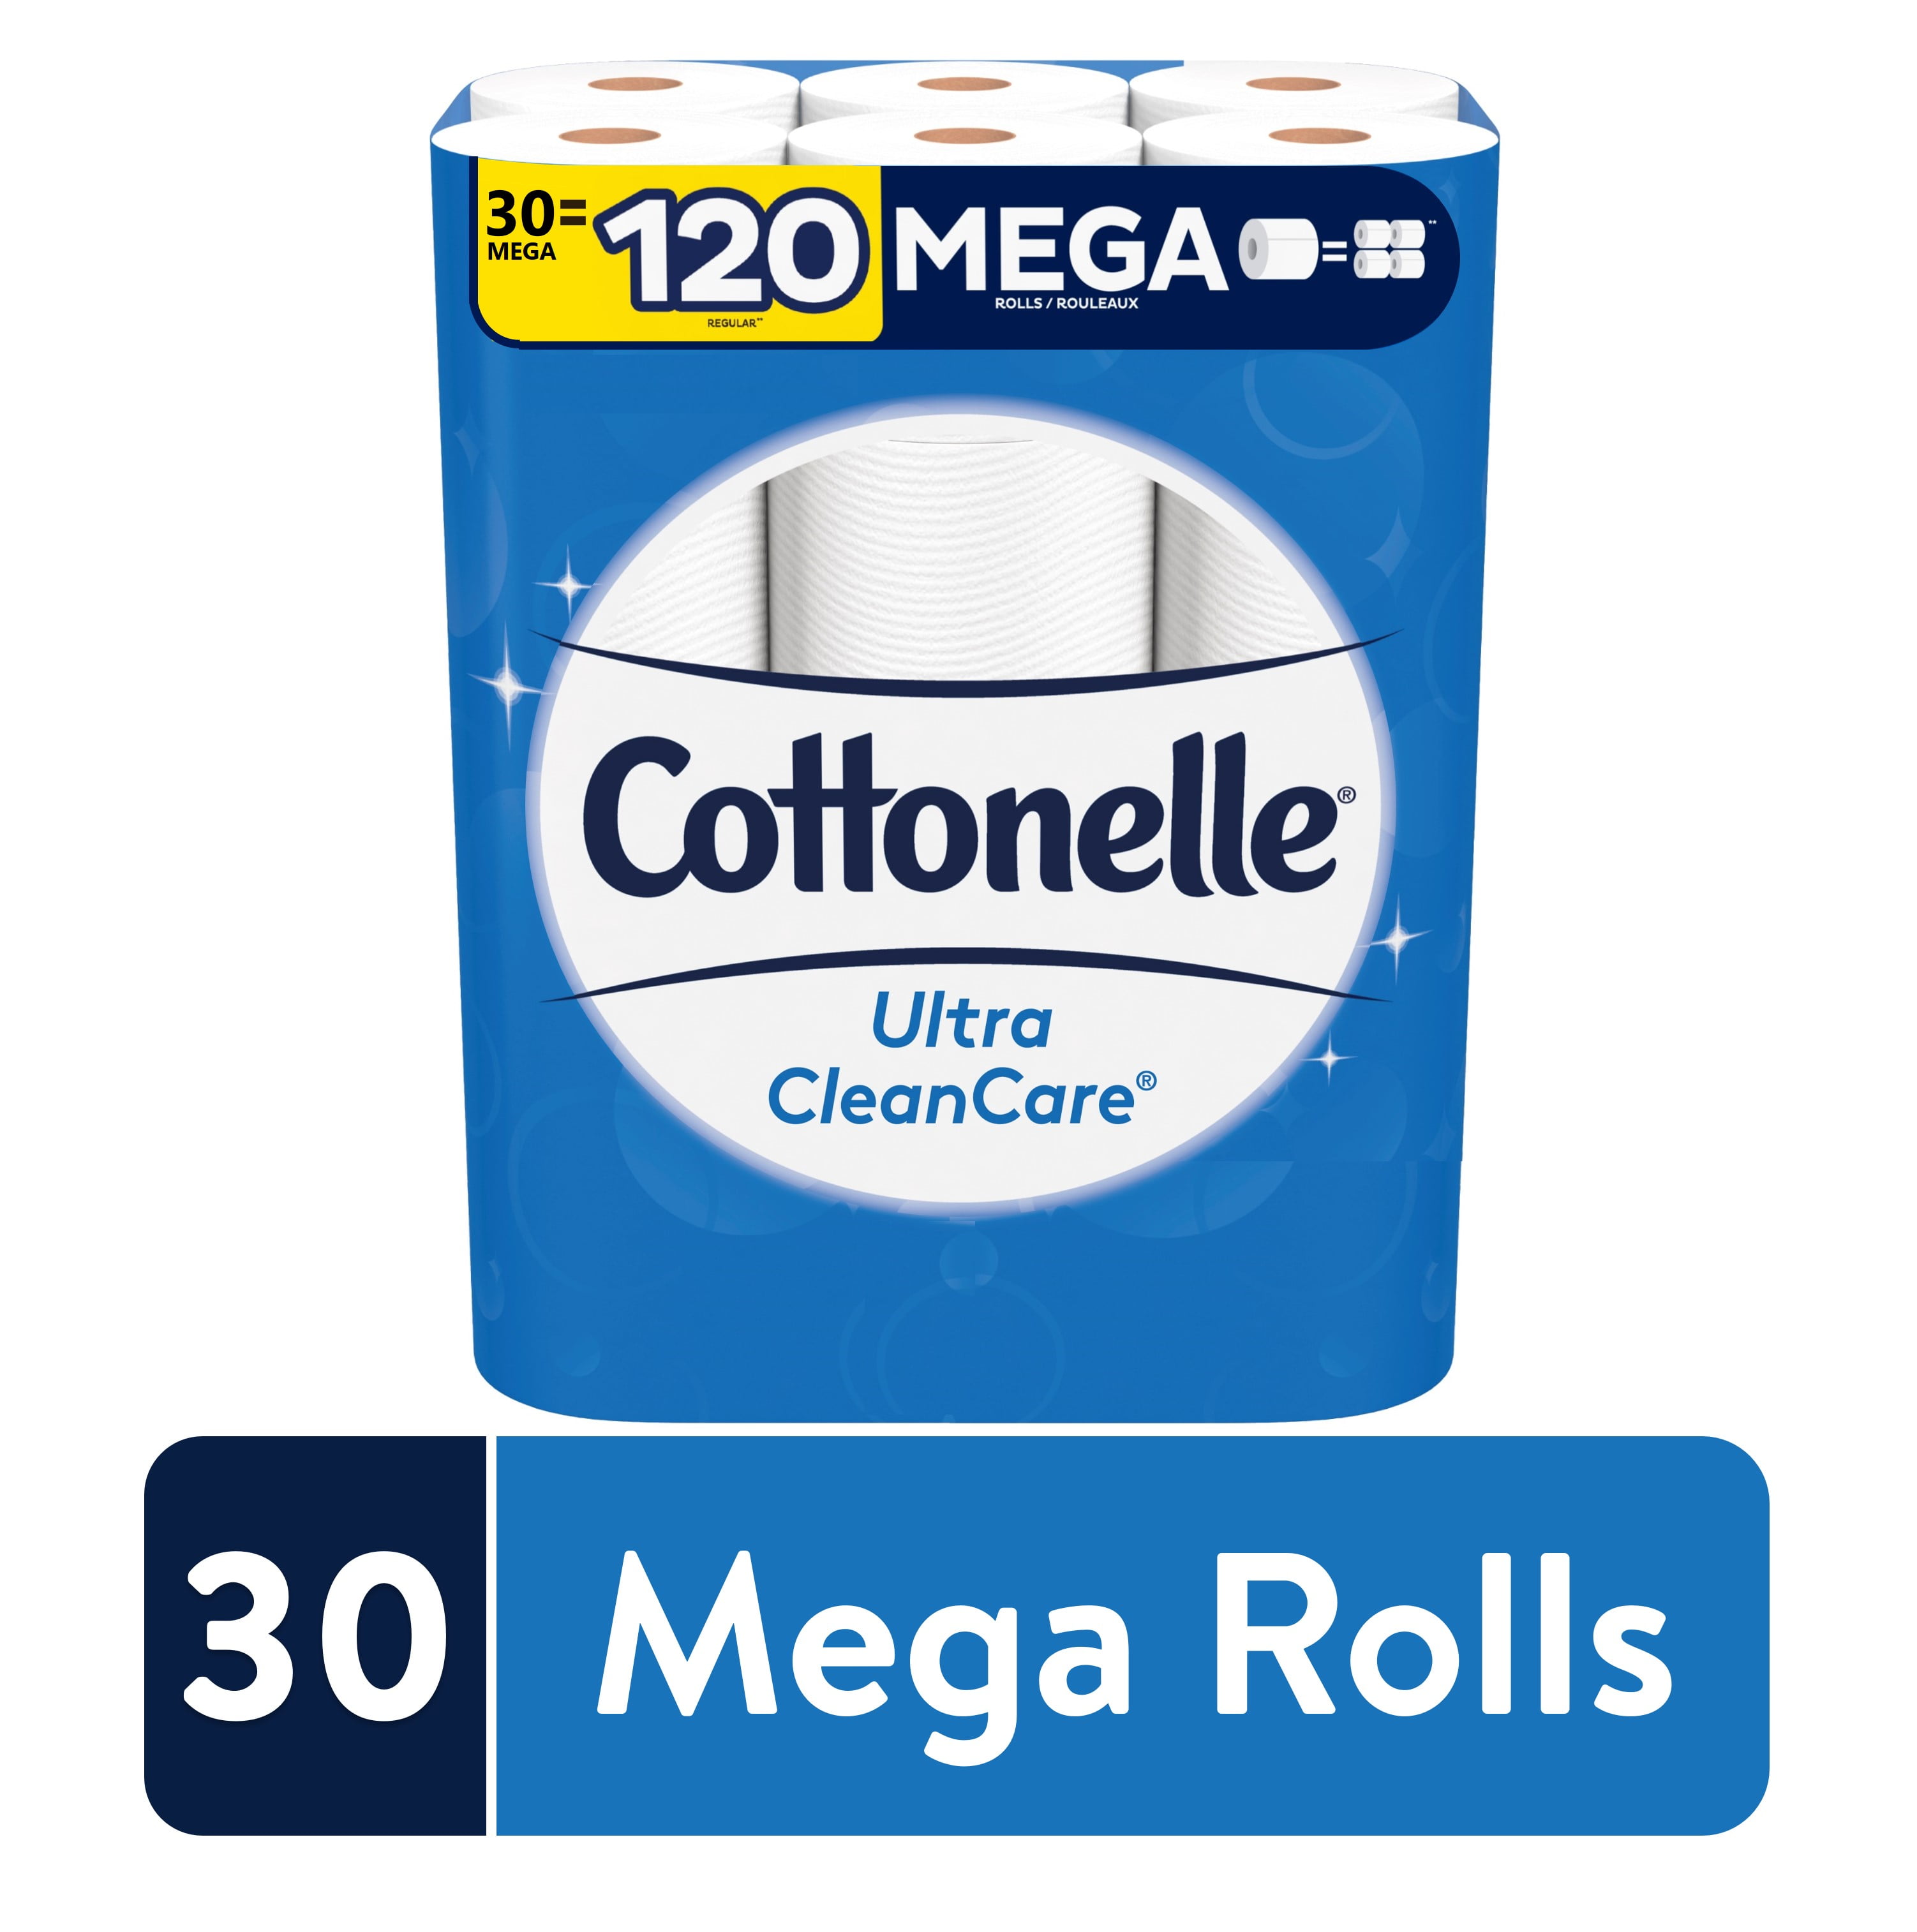 QTY x 2 Cottonelle Ultra Cleancare 12 Big Rolls =24 Regular Roll-SHIPS FREE- 